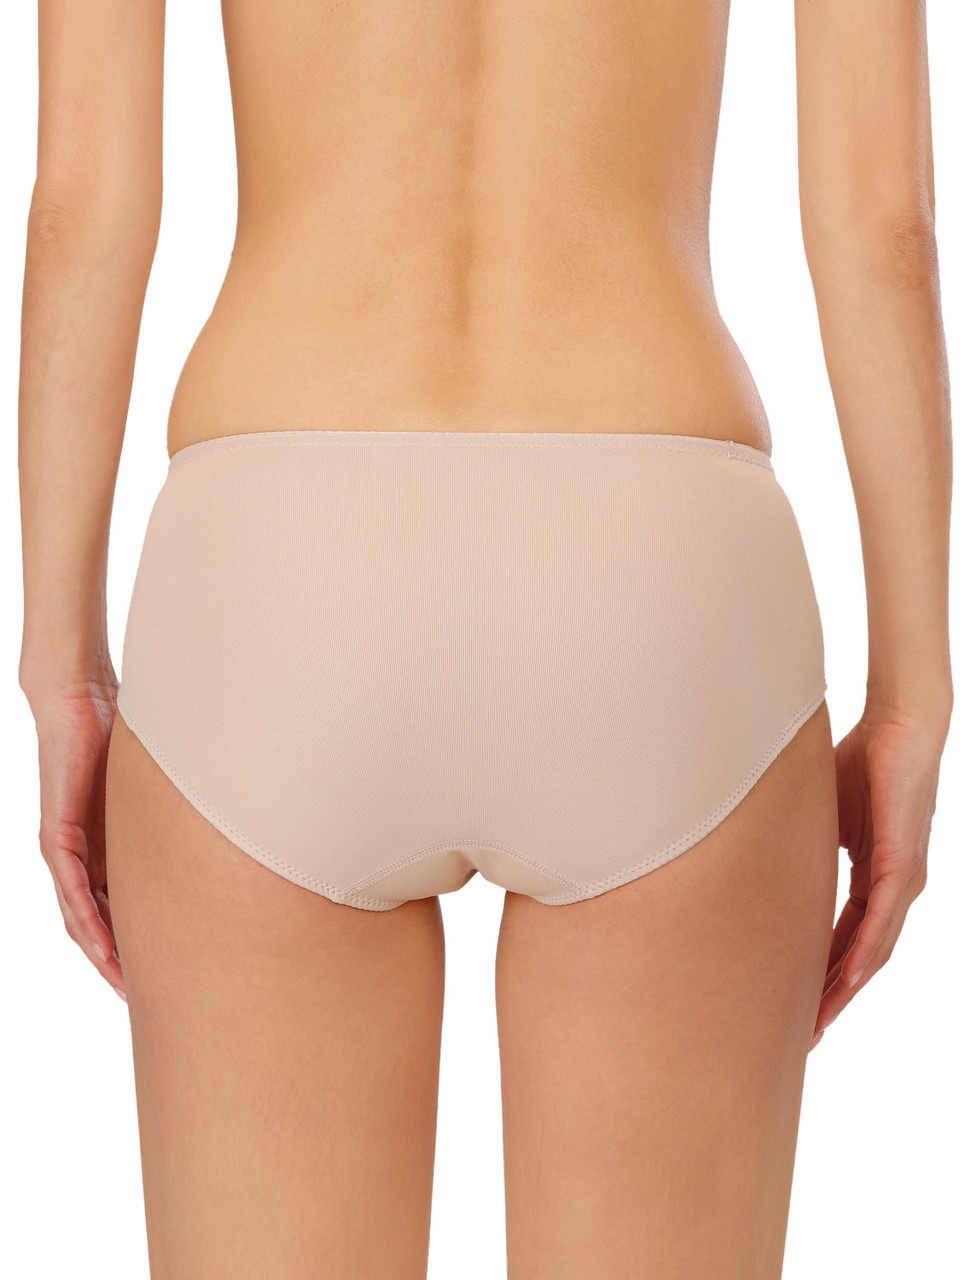 Panty Girdle - sassy and temperature enhancing & great for your figure